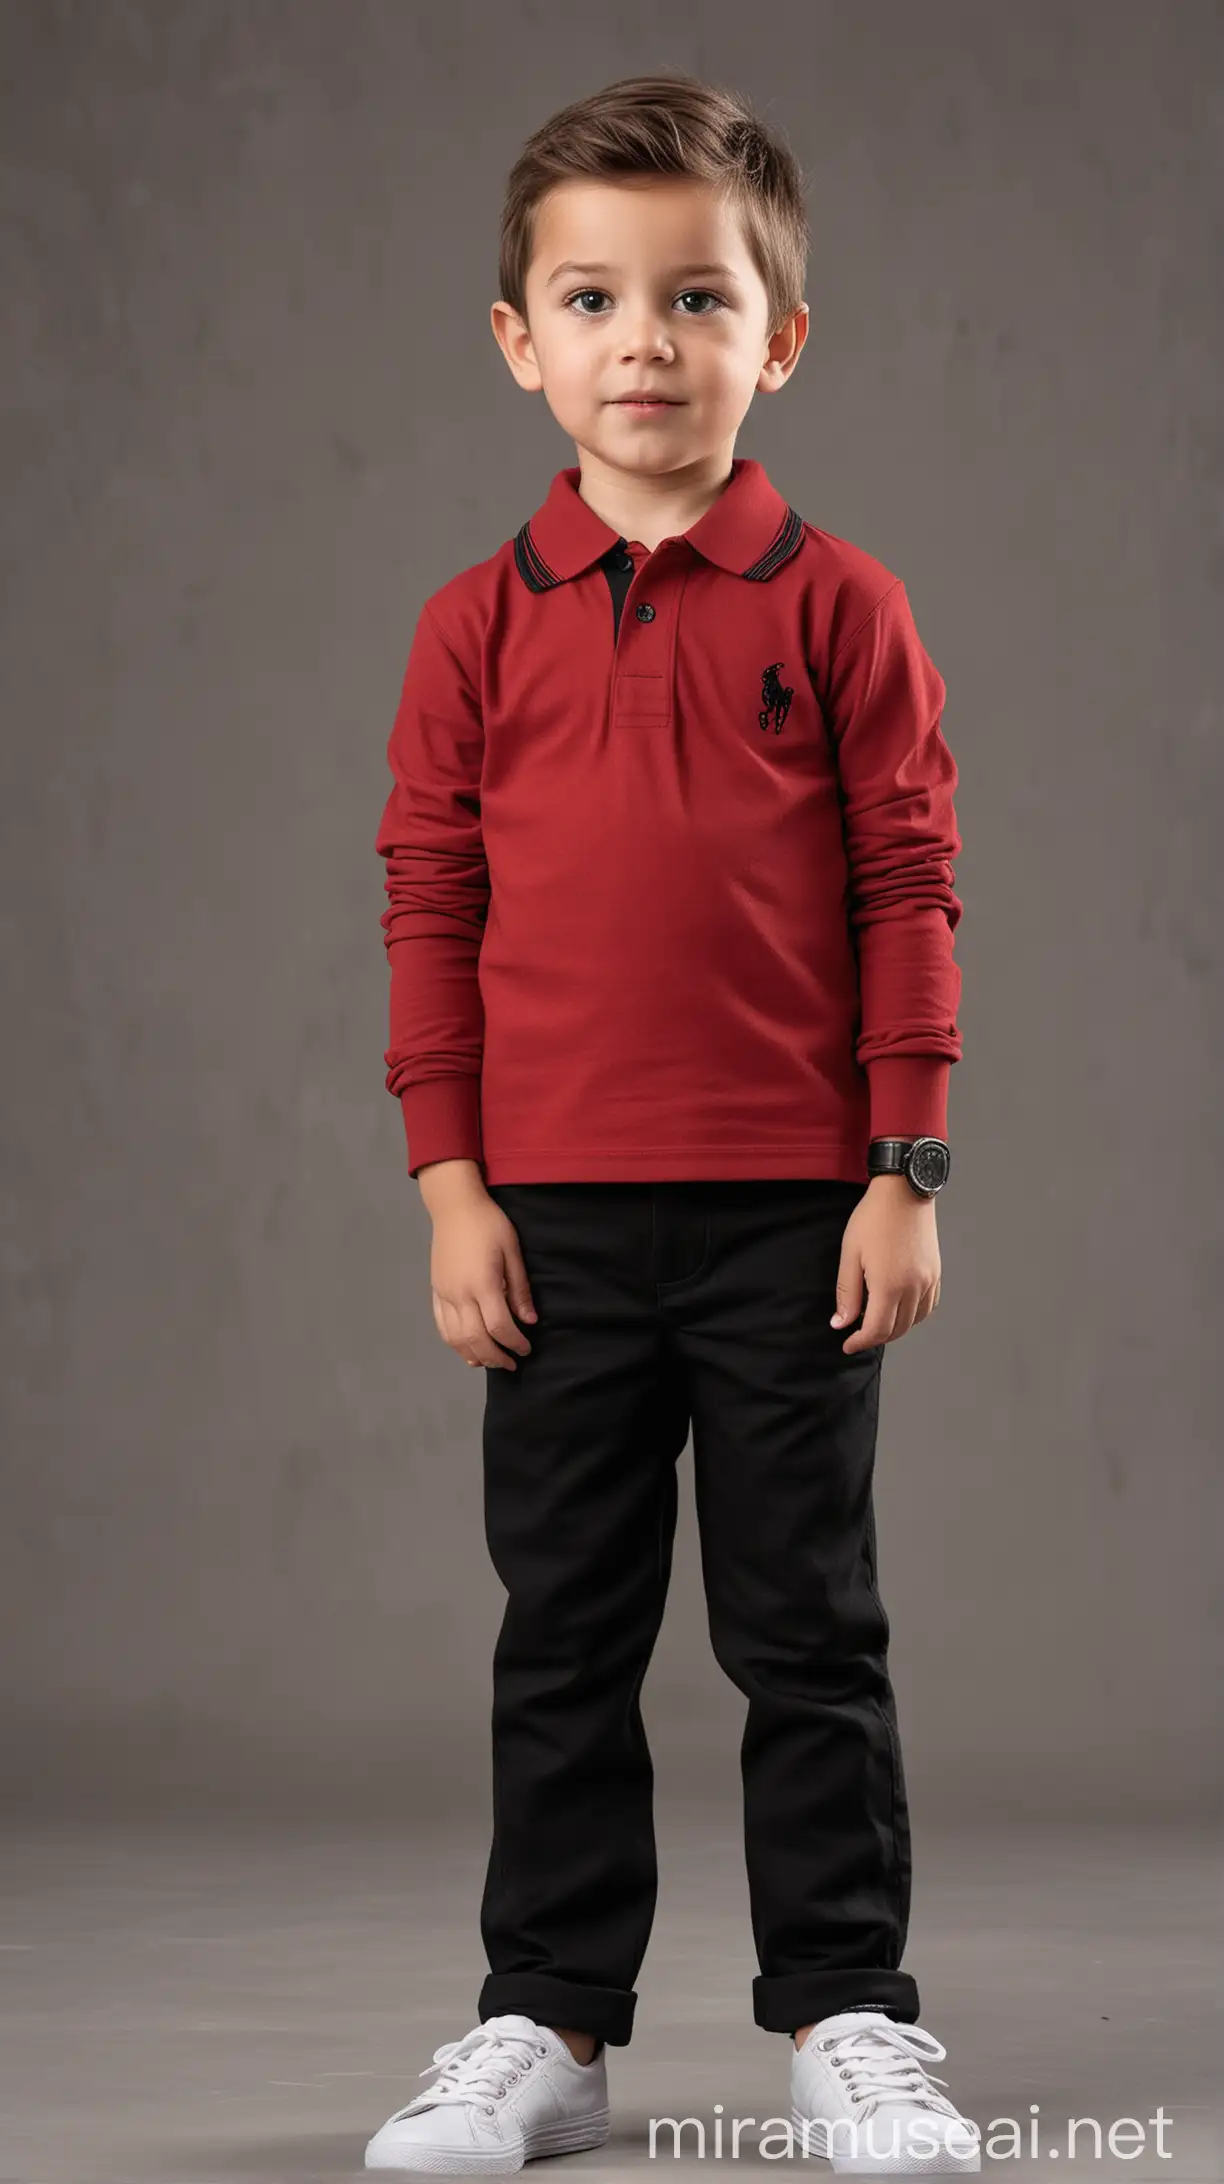 A four years boy wearing a full-sleeved red polo shirt with black trousers. Real, urban, full body, full image.